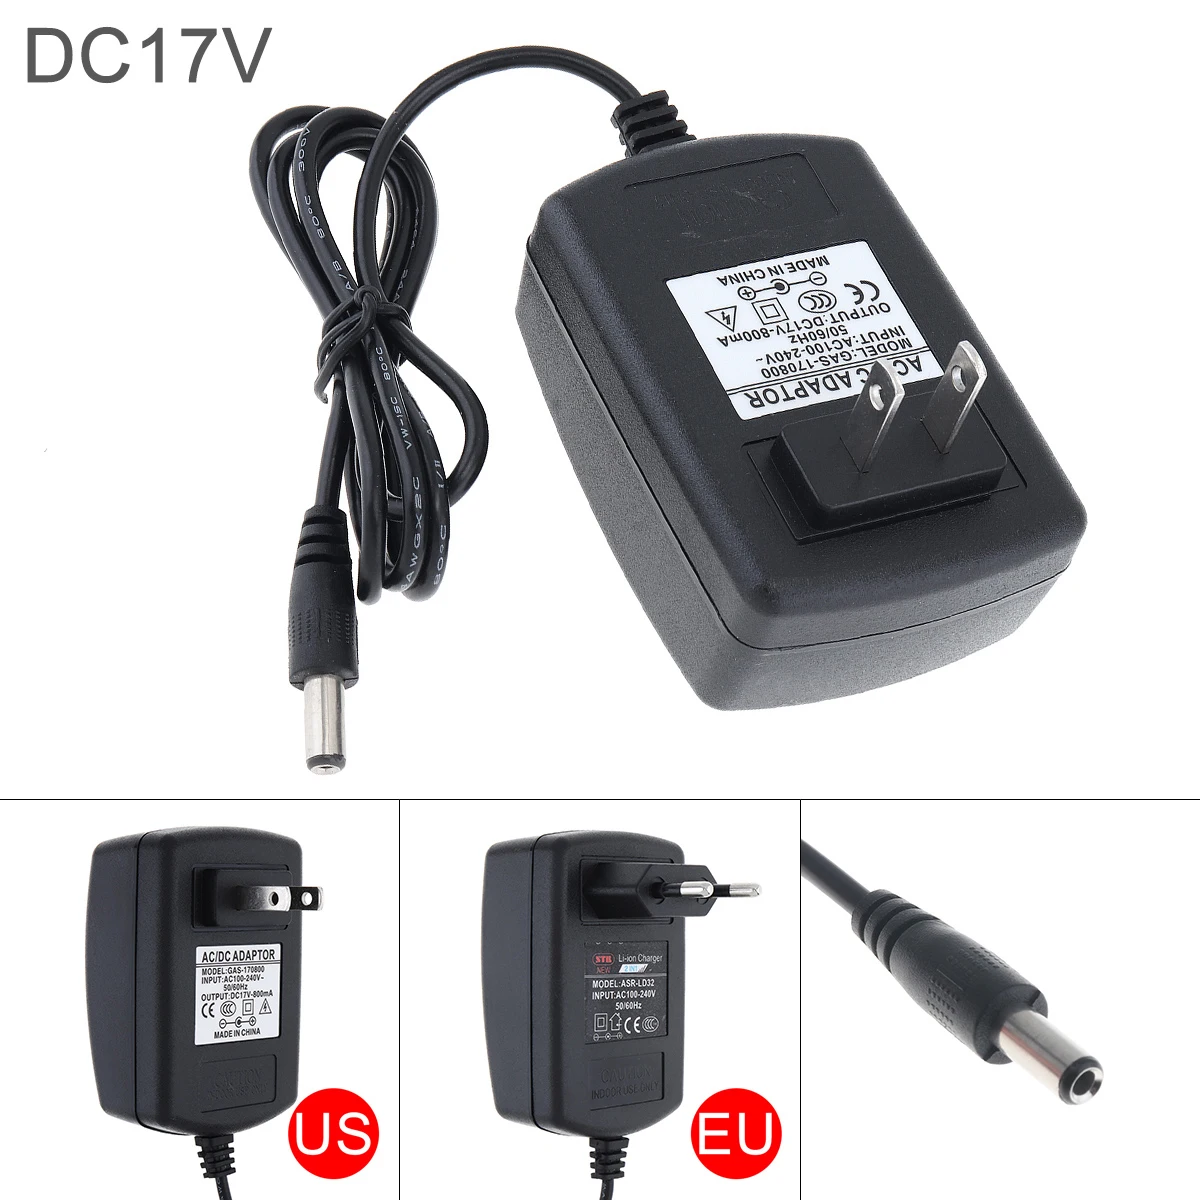 80cm Universal DC 16.8-17V Lithium Battery Rechargeable Charger 100-240V Power Supply for Lithium Electrical Drill Screwdriver sunmoon er17505m power type 3 6v dedicated intelligent water meter lithium battery universal flow meter gas meter battery